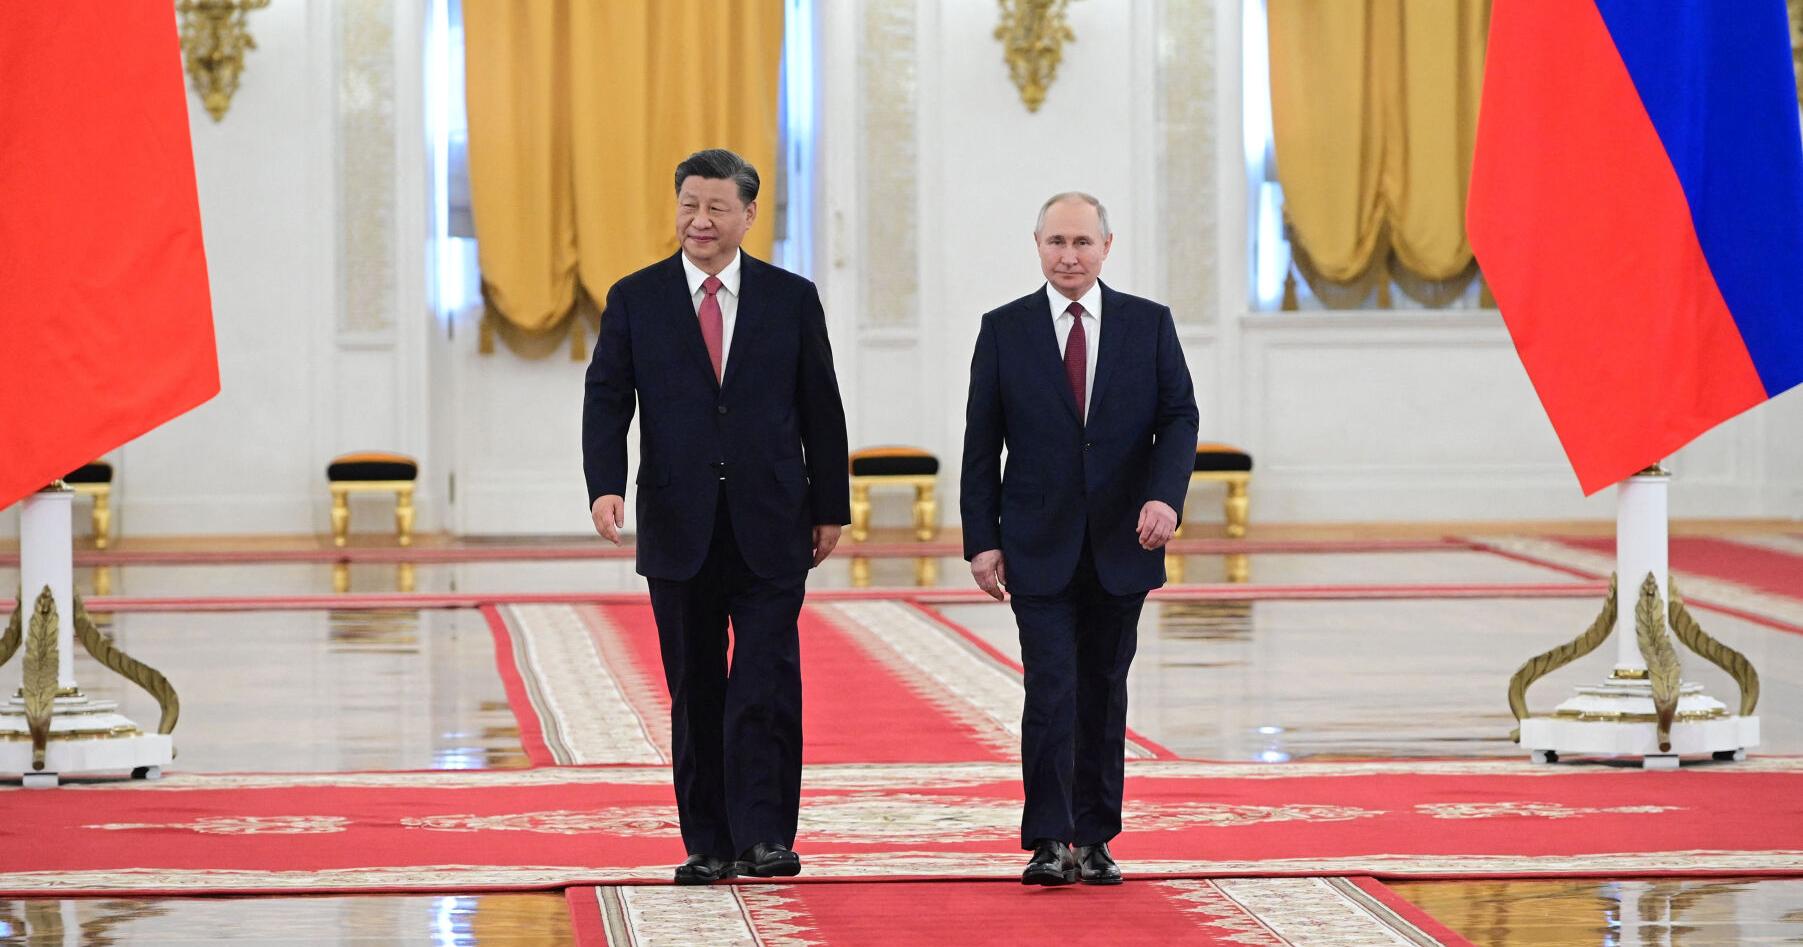 After talks with Xi, Putin hails China proposals for Ukraine